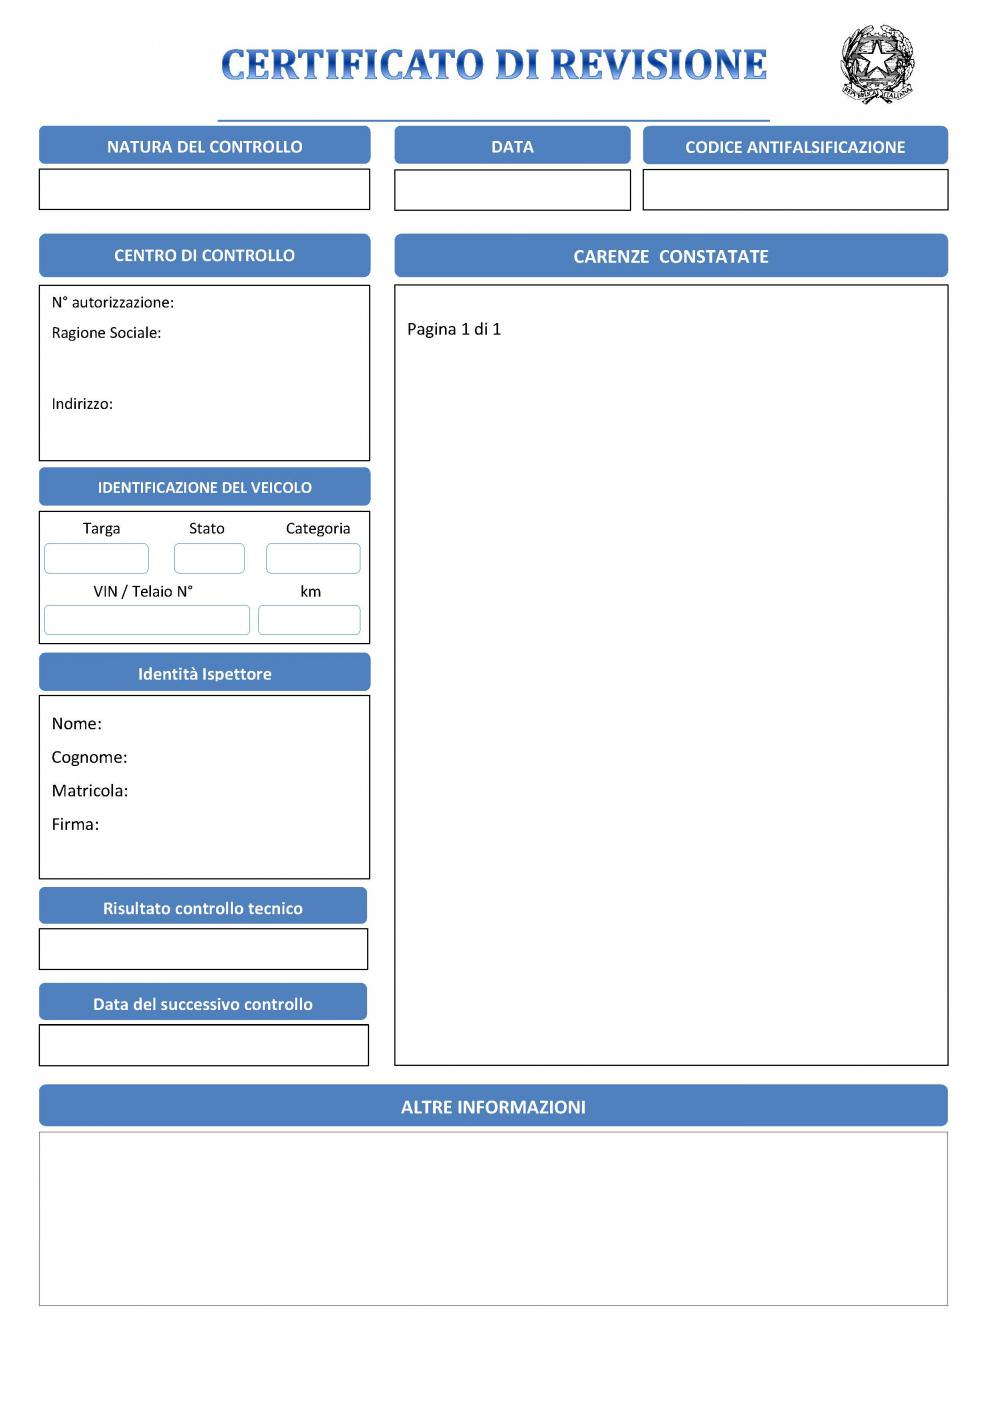 Roadworthiness Certificate template in Italy